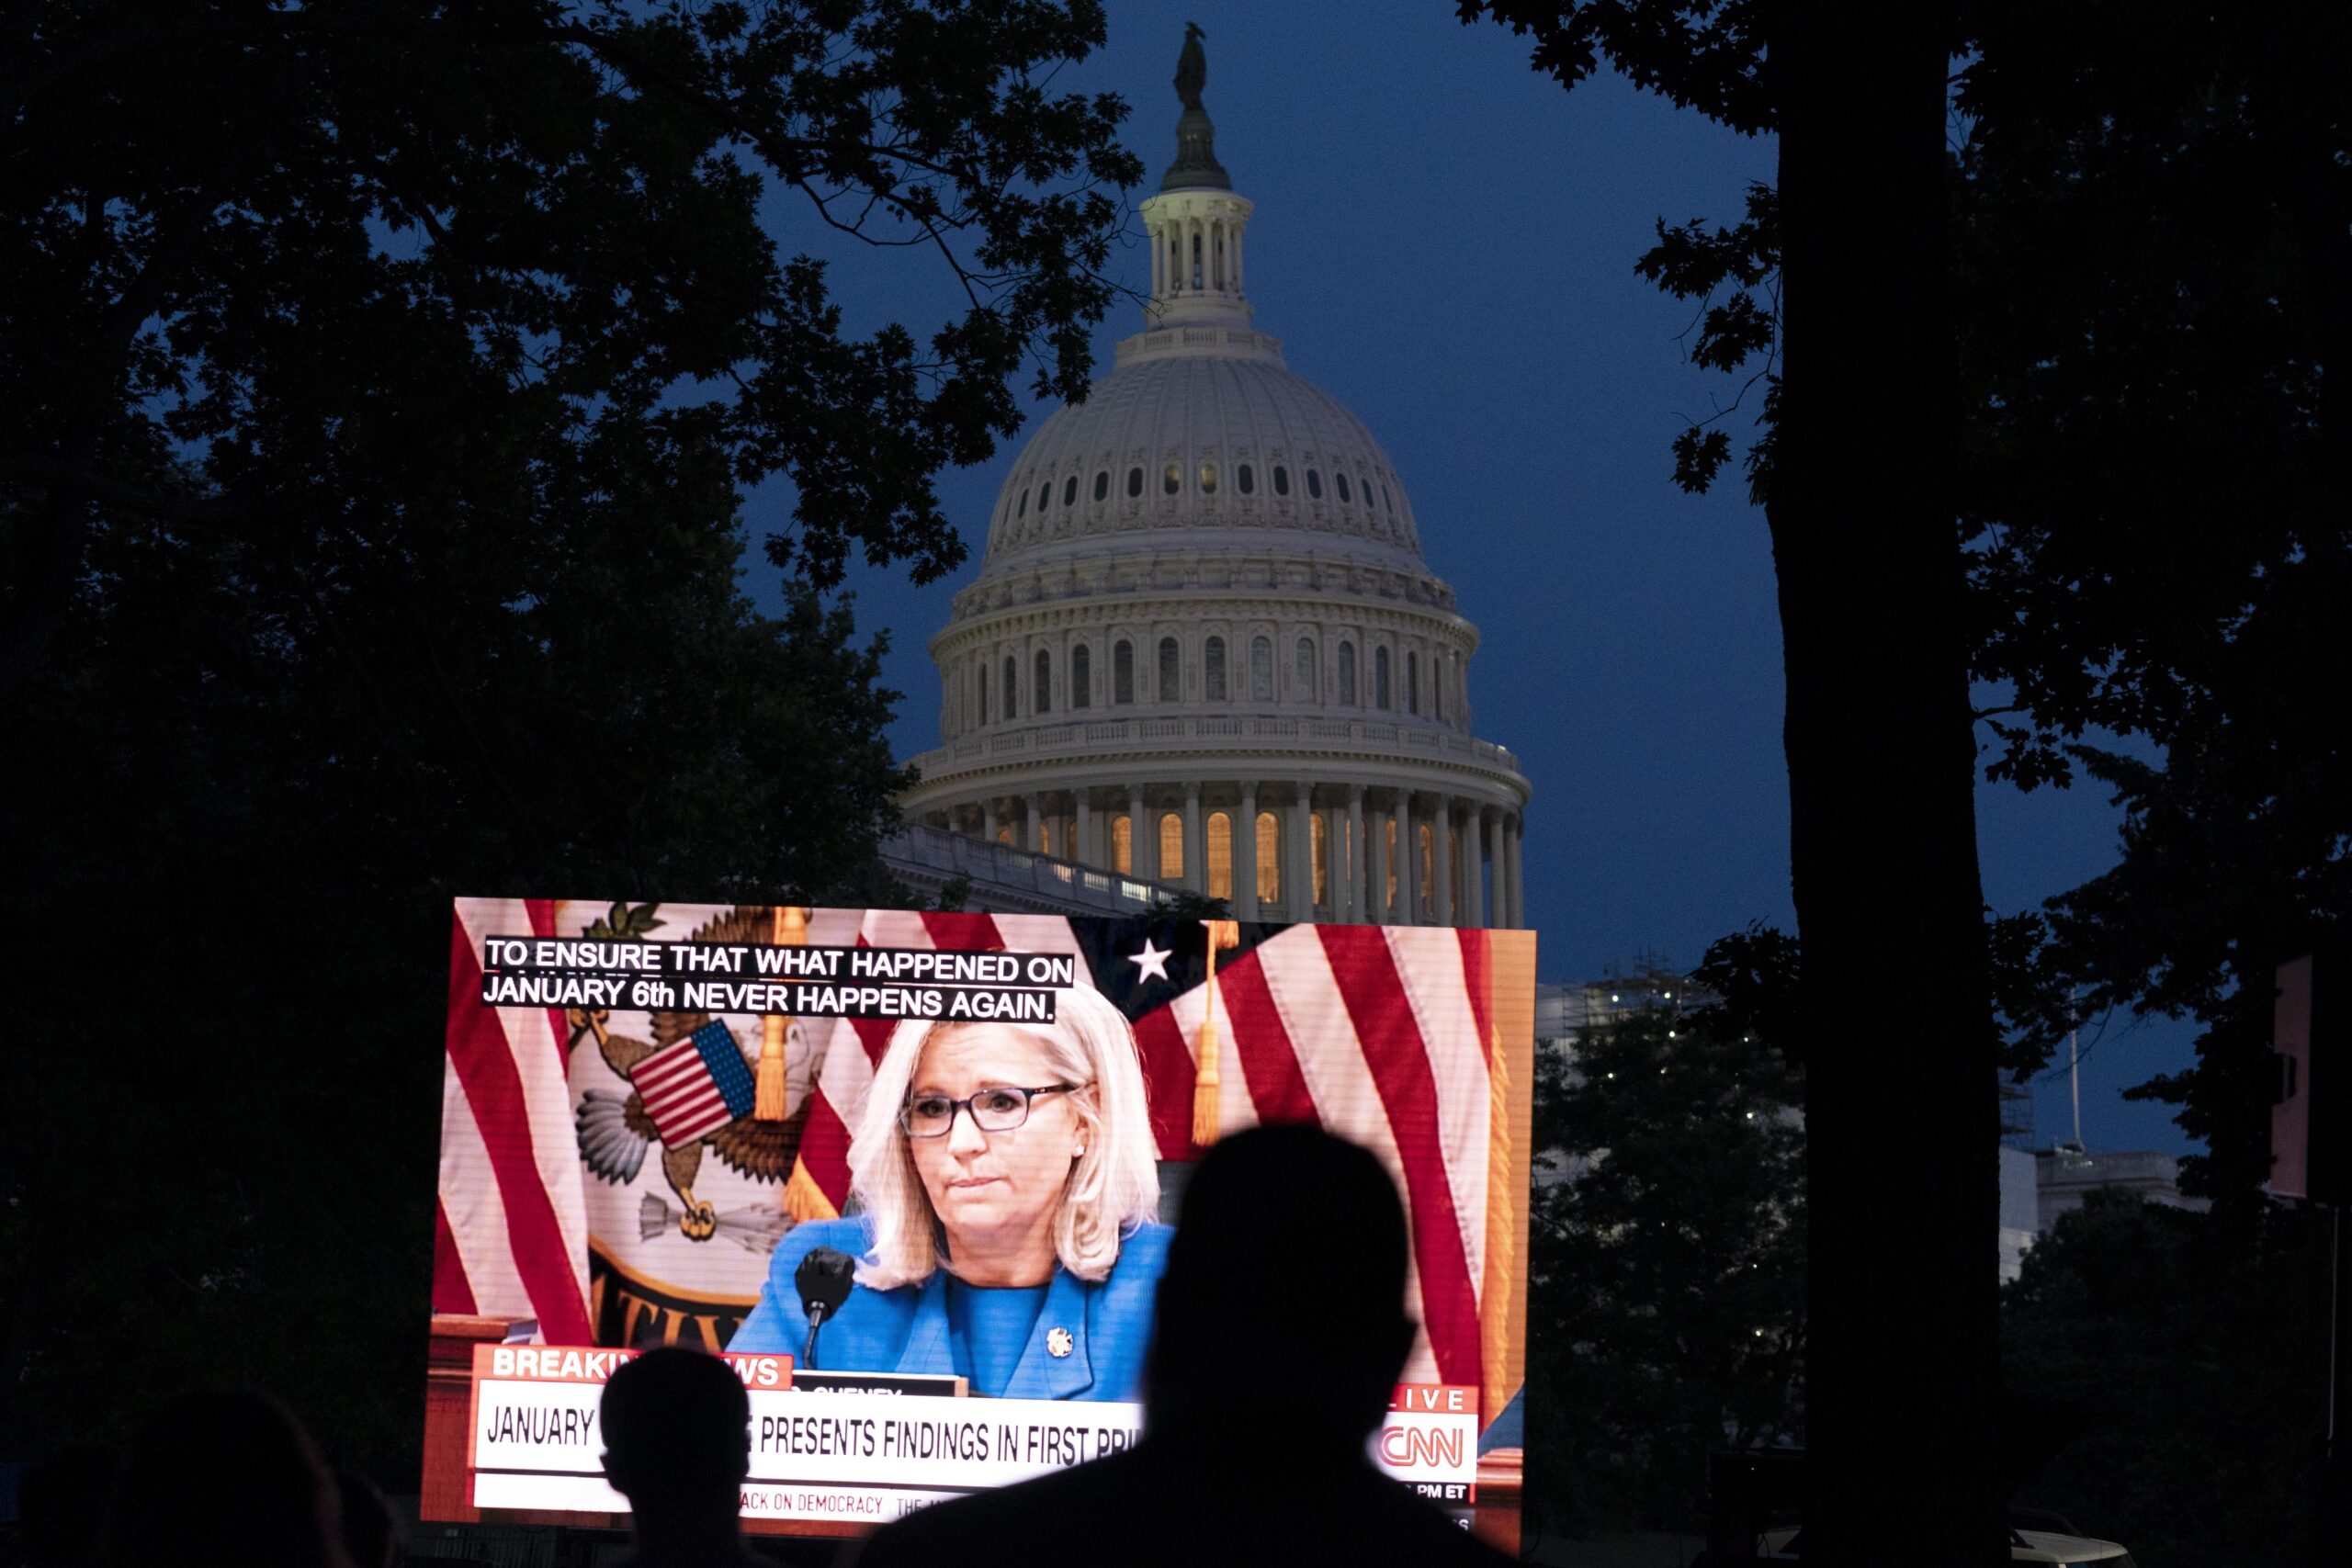 People watching the televised Jan. 6 hearings outside of the U.S. Capitol